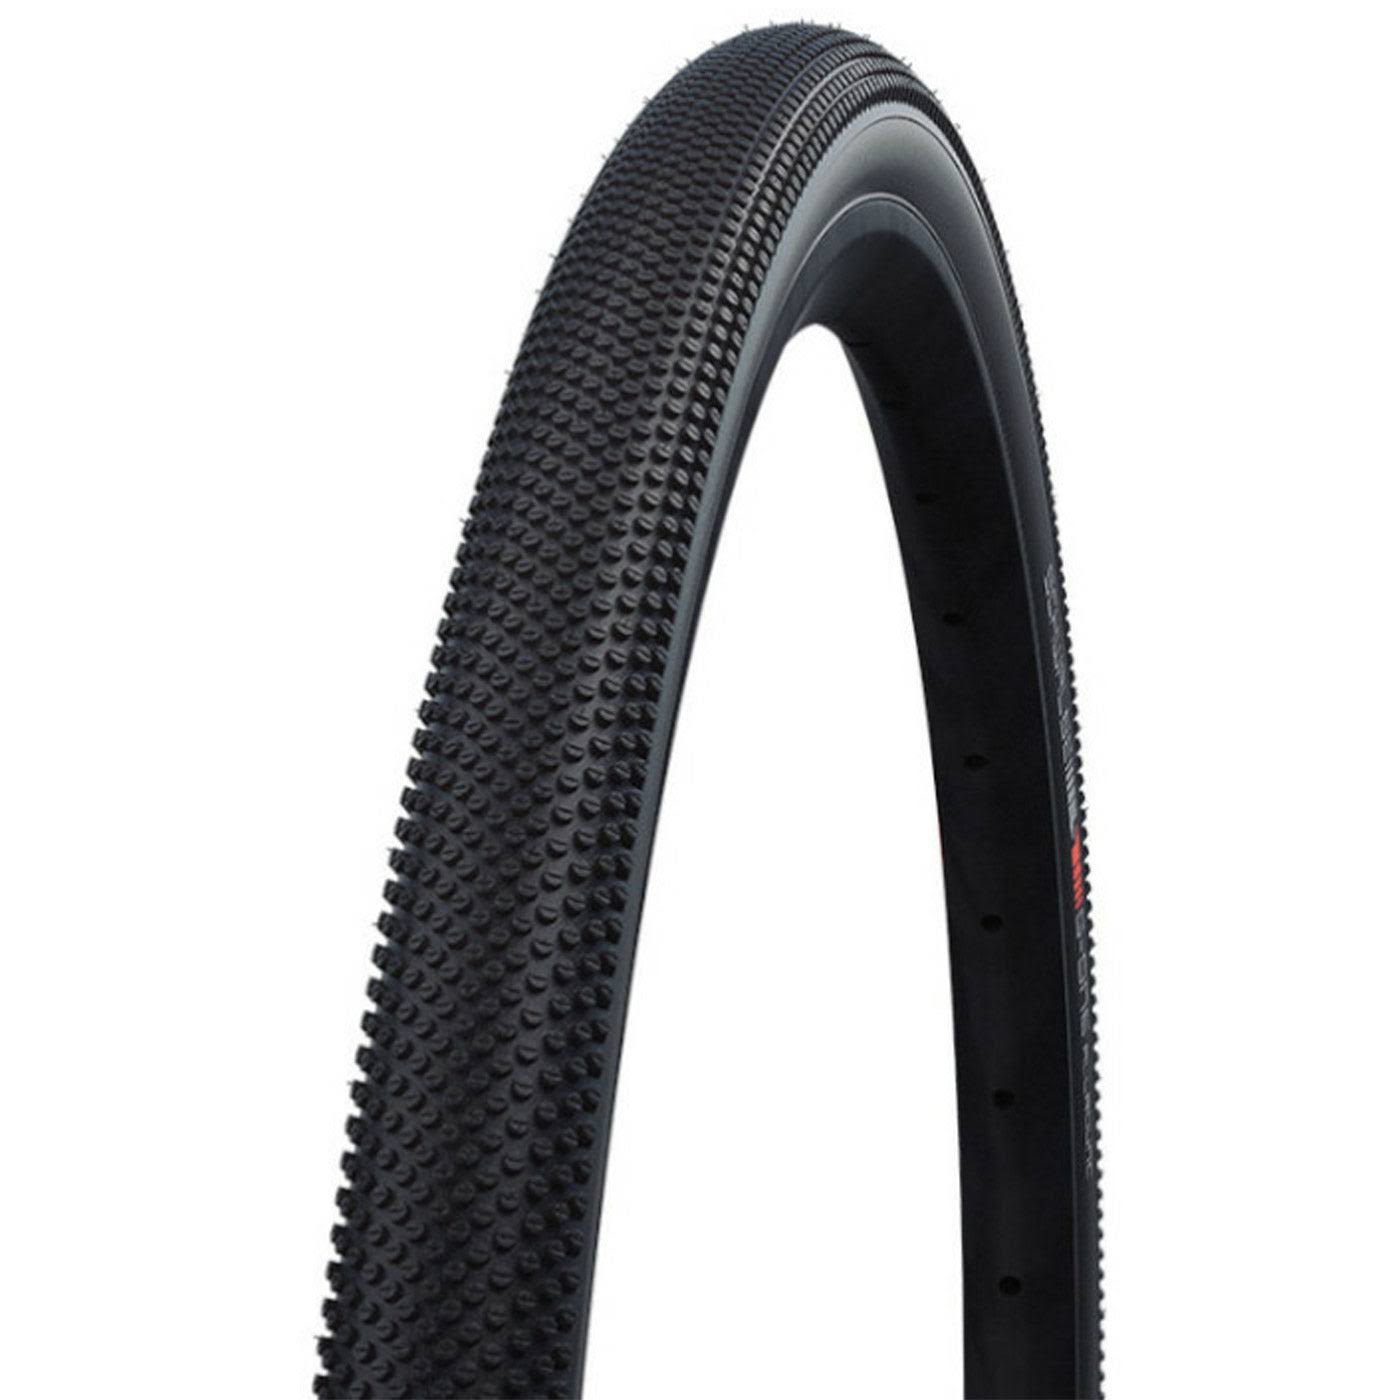 Schwalbe G-One Allround 700c Tubeless Easy